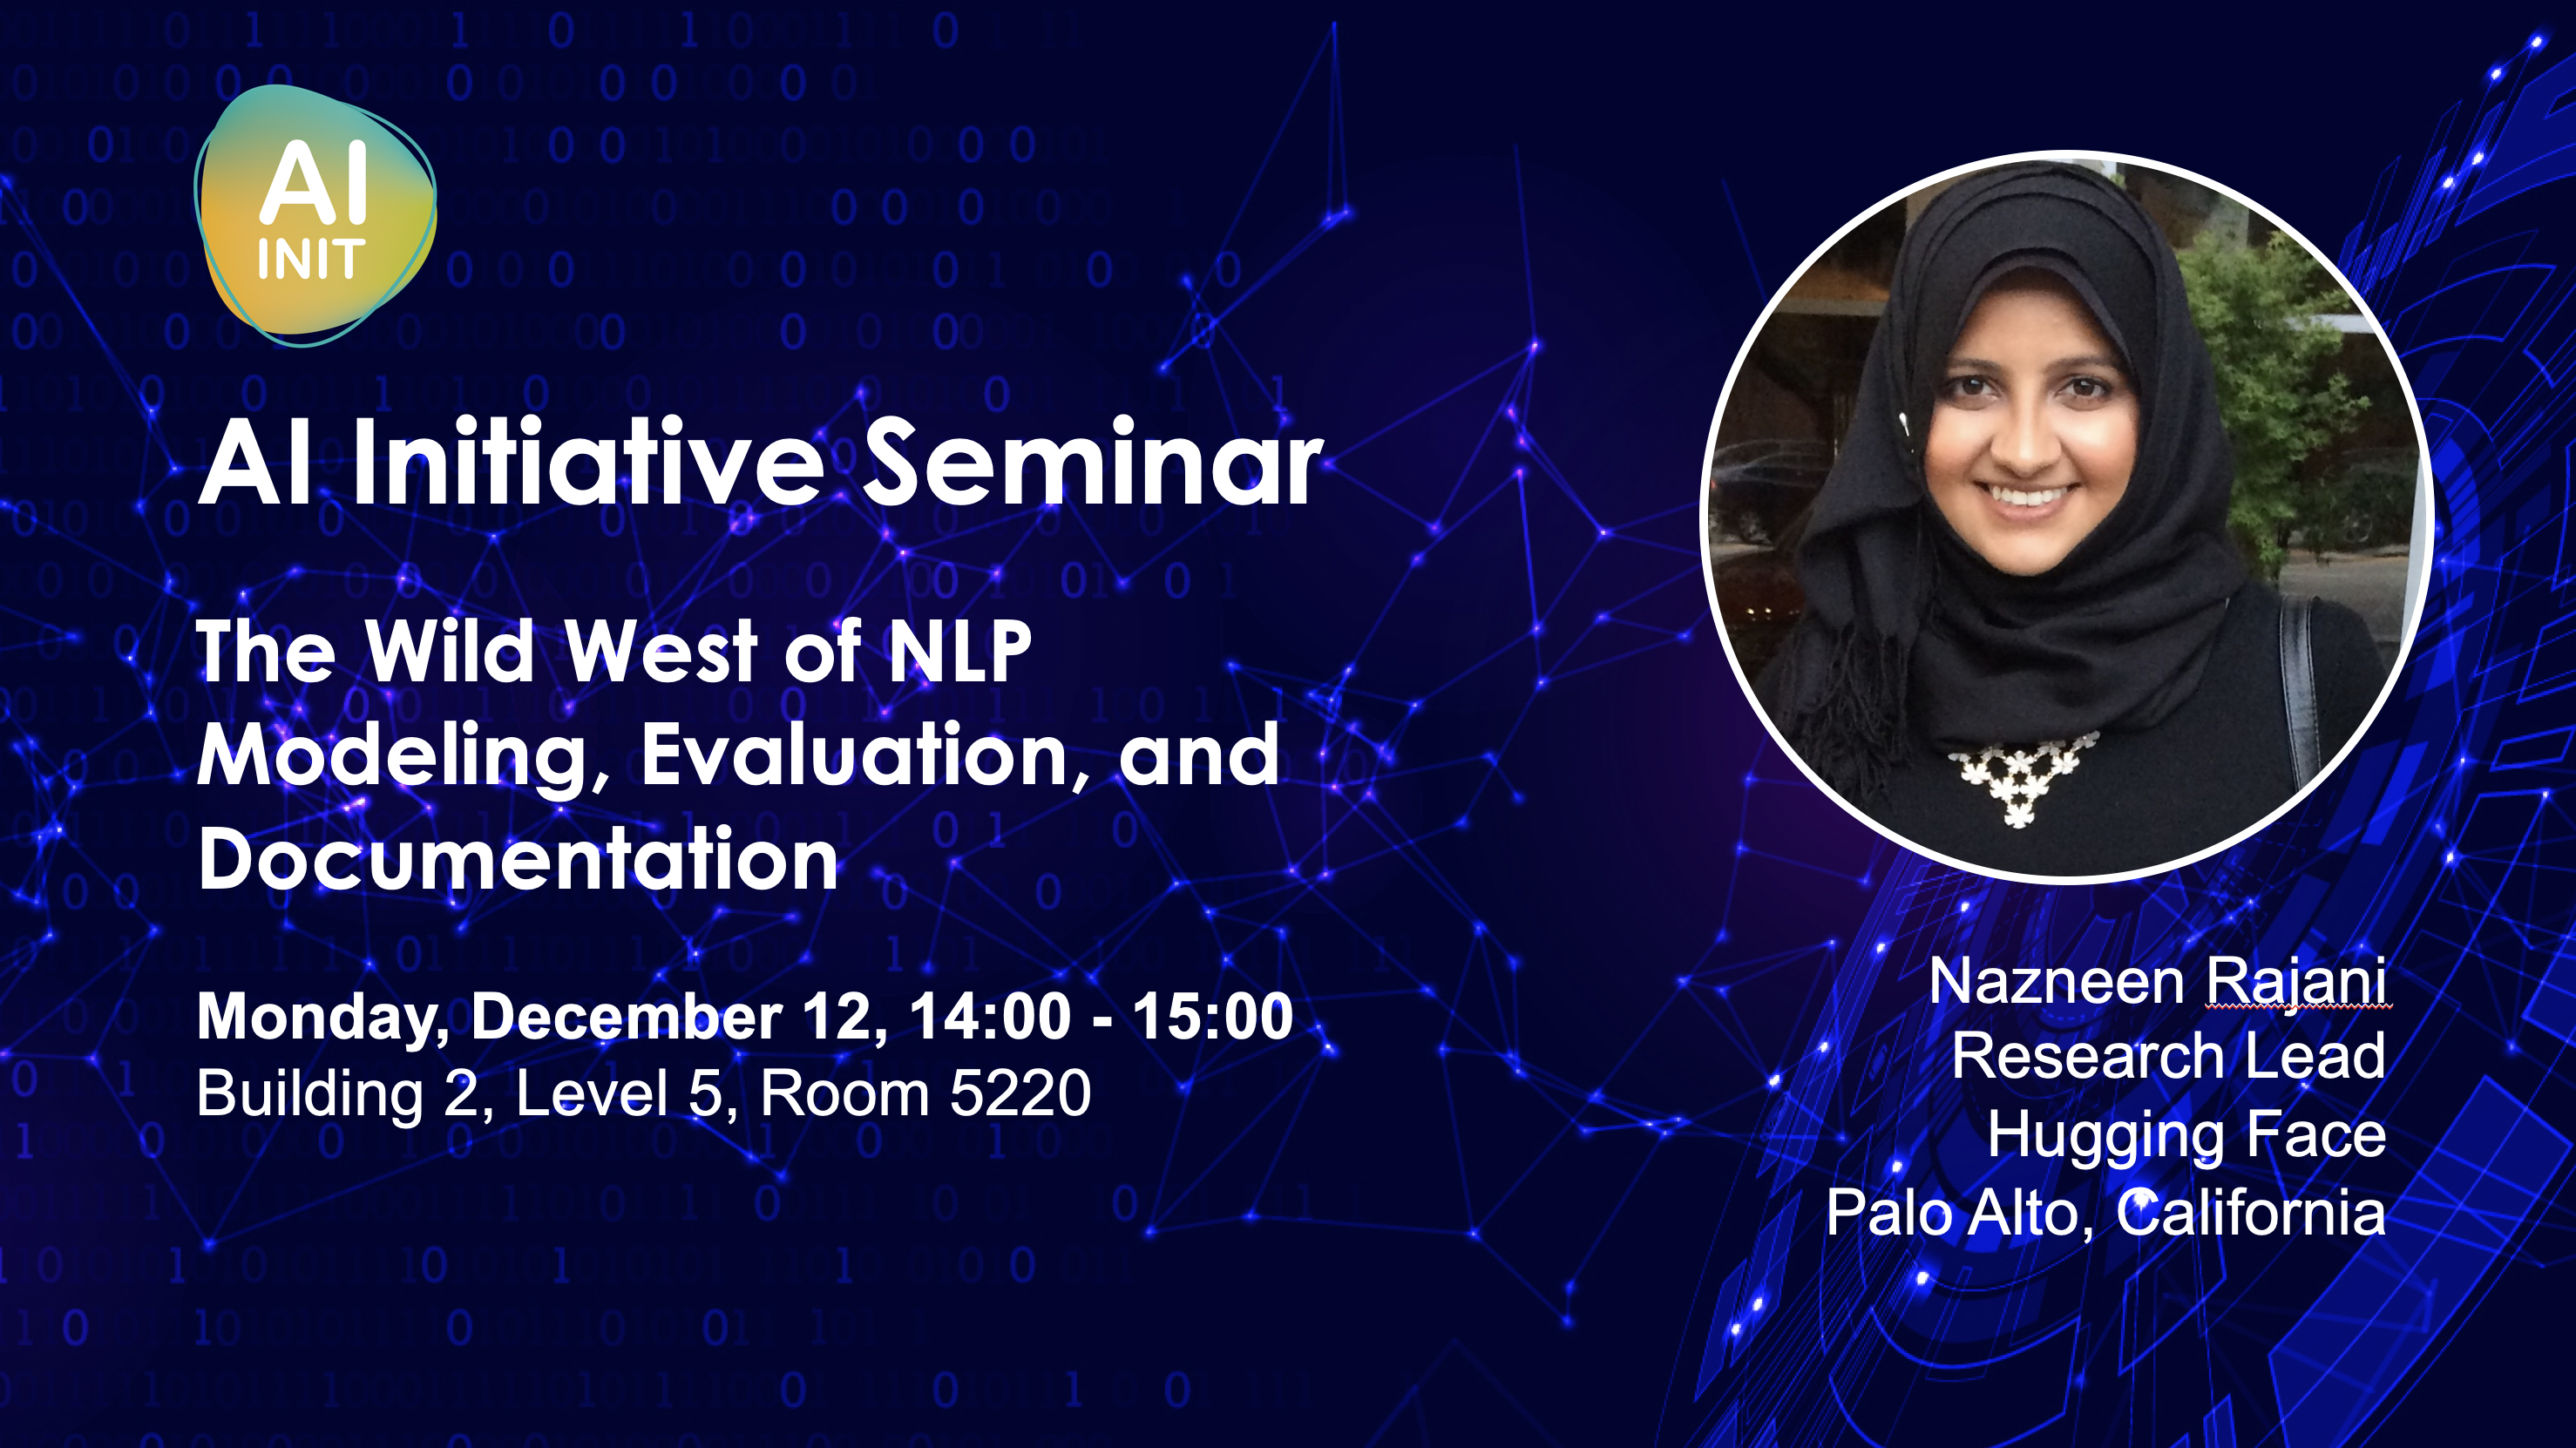 KAUST-CEMSE-AI-The-Wild-West-of-NLP-Modeling-Evaluation-and-Documentation-Nazneen-Rajani 